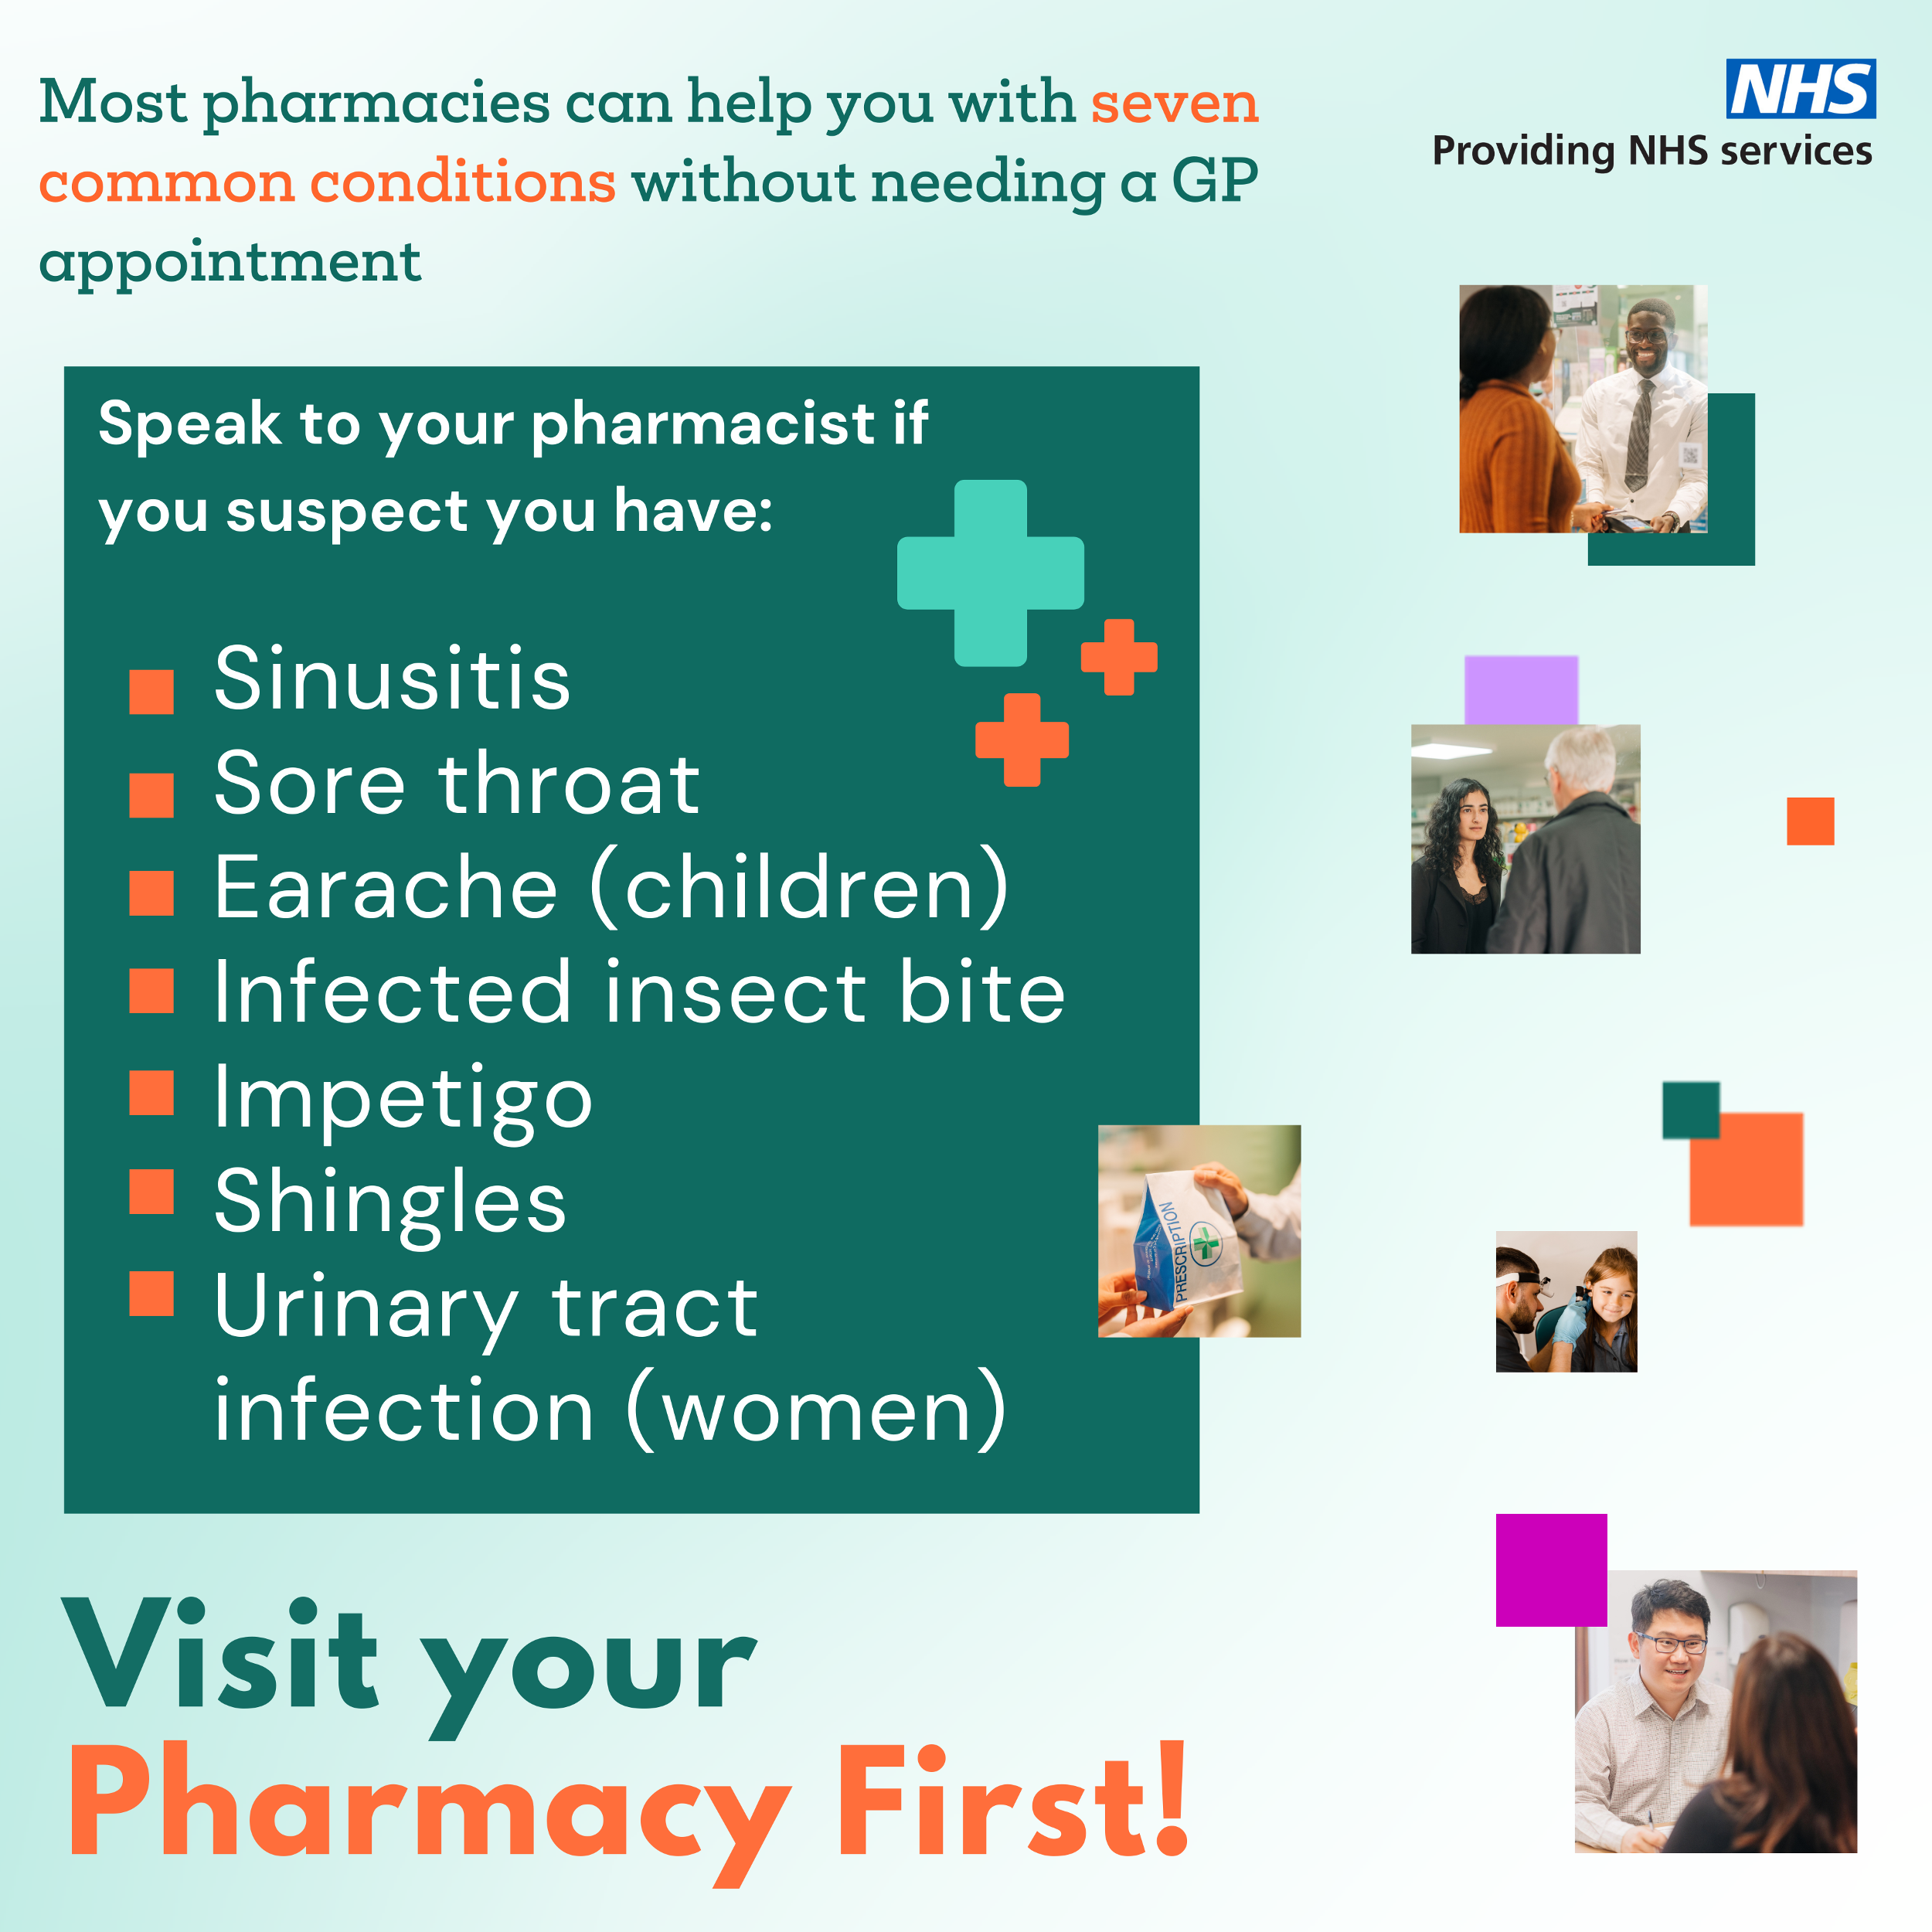 Most pharmacies can help you with seven common conditions without needing a GP appointment. Speak to your pharmacist if you suspect you have: sinusitis, sore throat, earache (children), infected insect bite, impetigo, shingles, urinary tract infection (women). Visit your Pharmacy First.